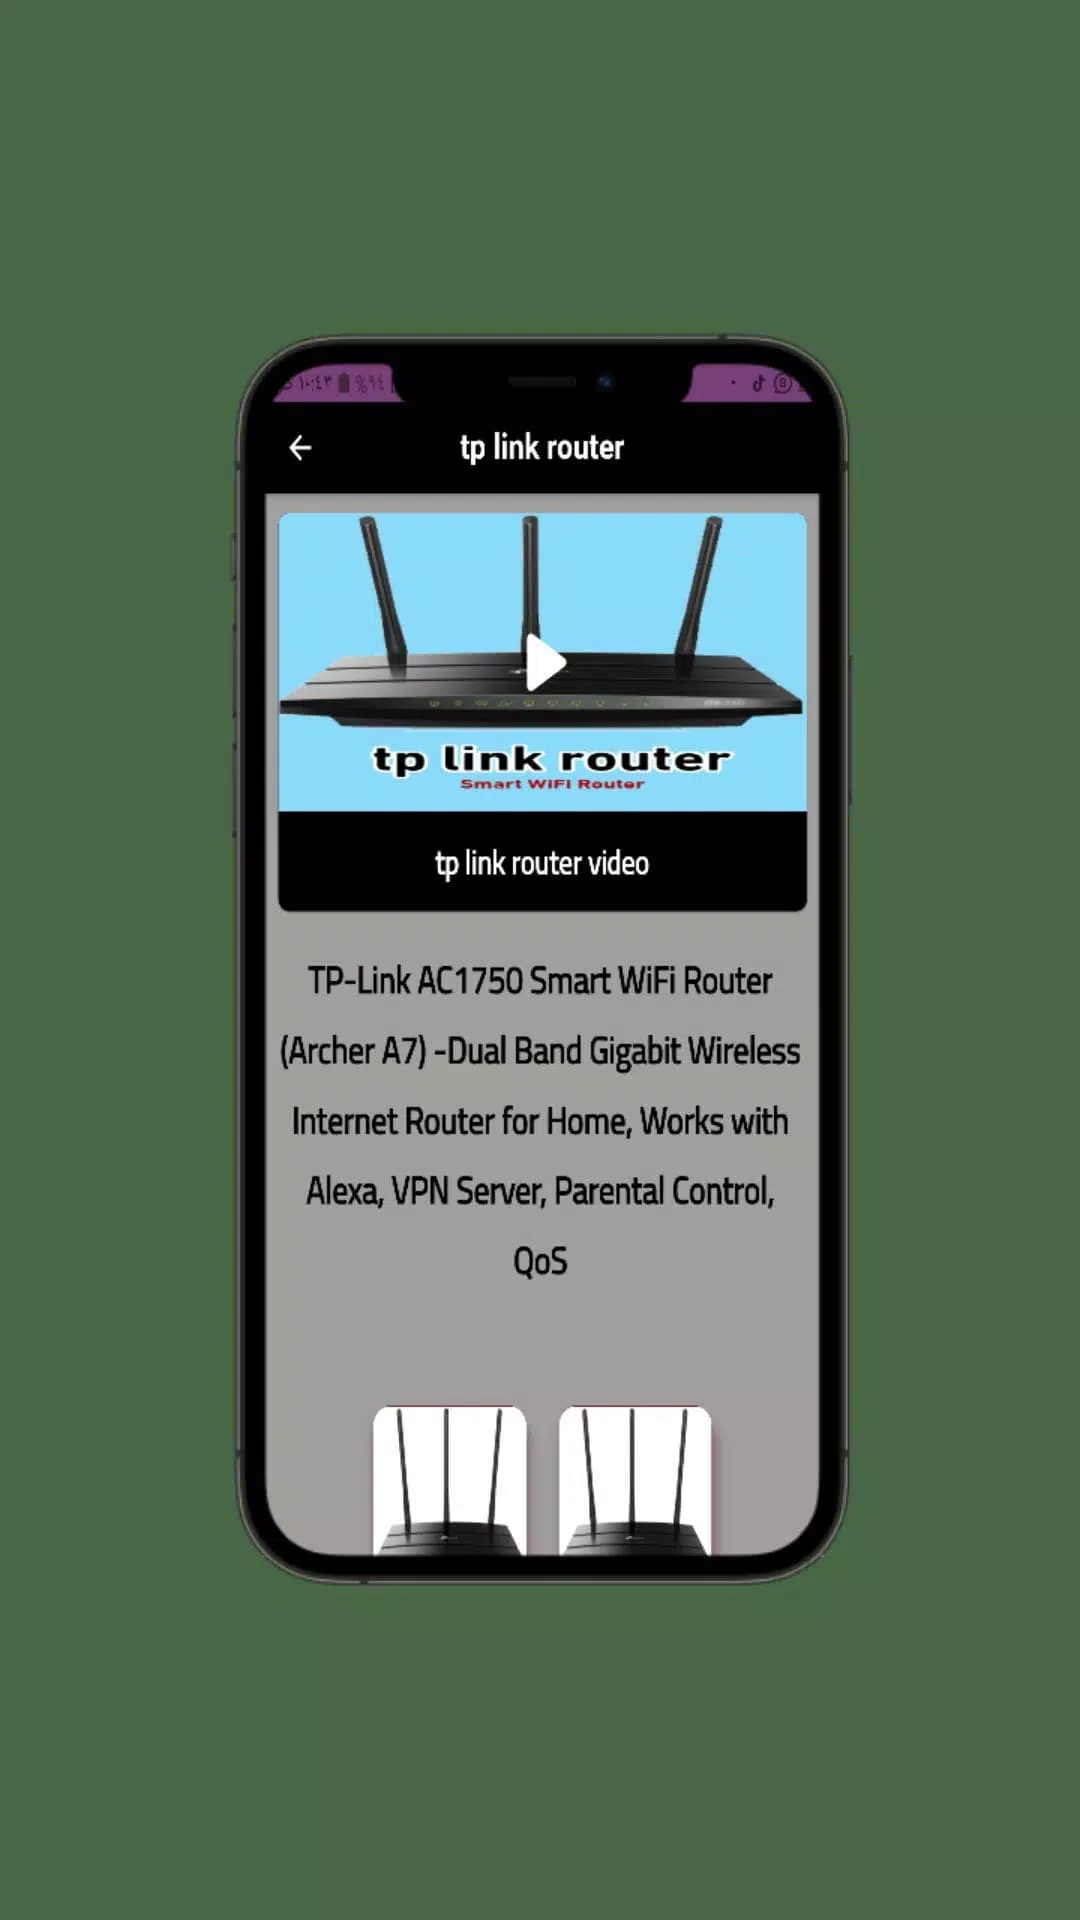 tp link router for Android - APK Download